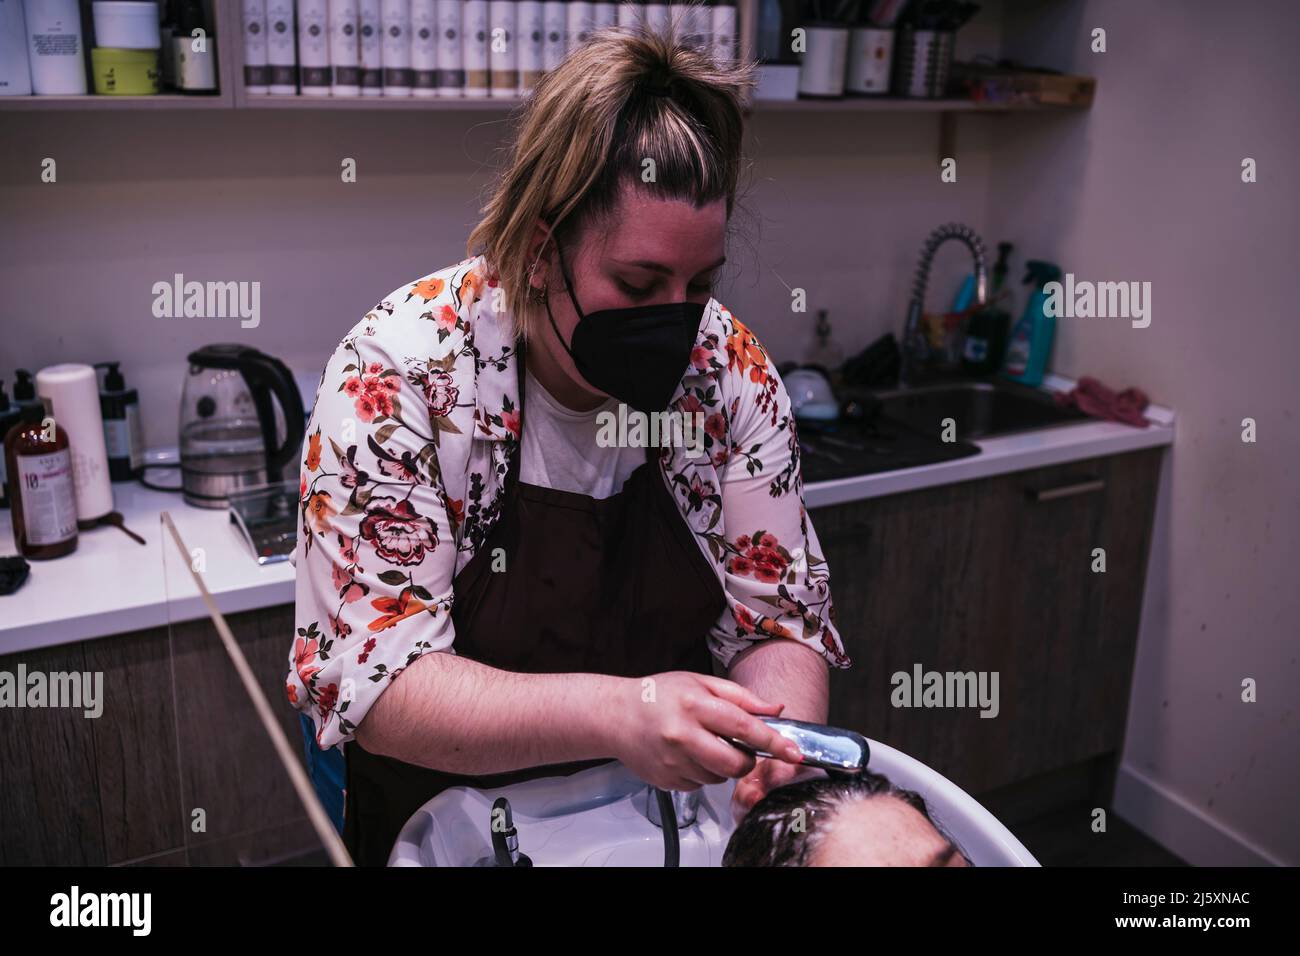 beautiful young woman enjoying a head massage with her eyes closed, while the professional hairdresser washes her hair with shampoo. Hairstylist worki Stock Photo